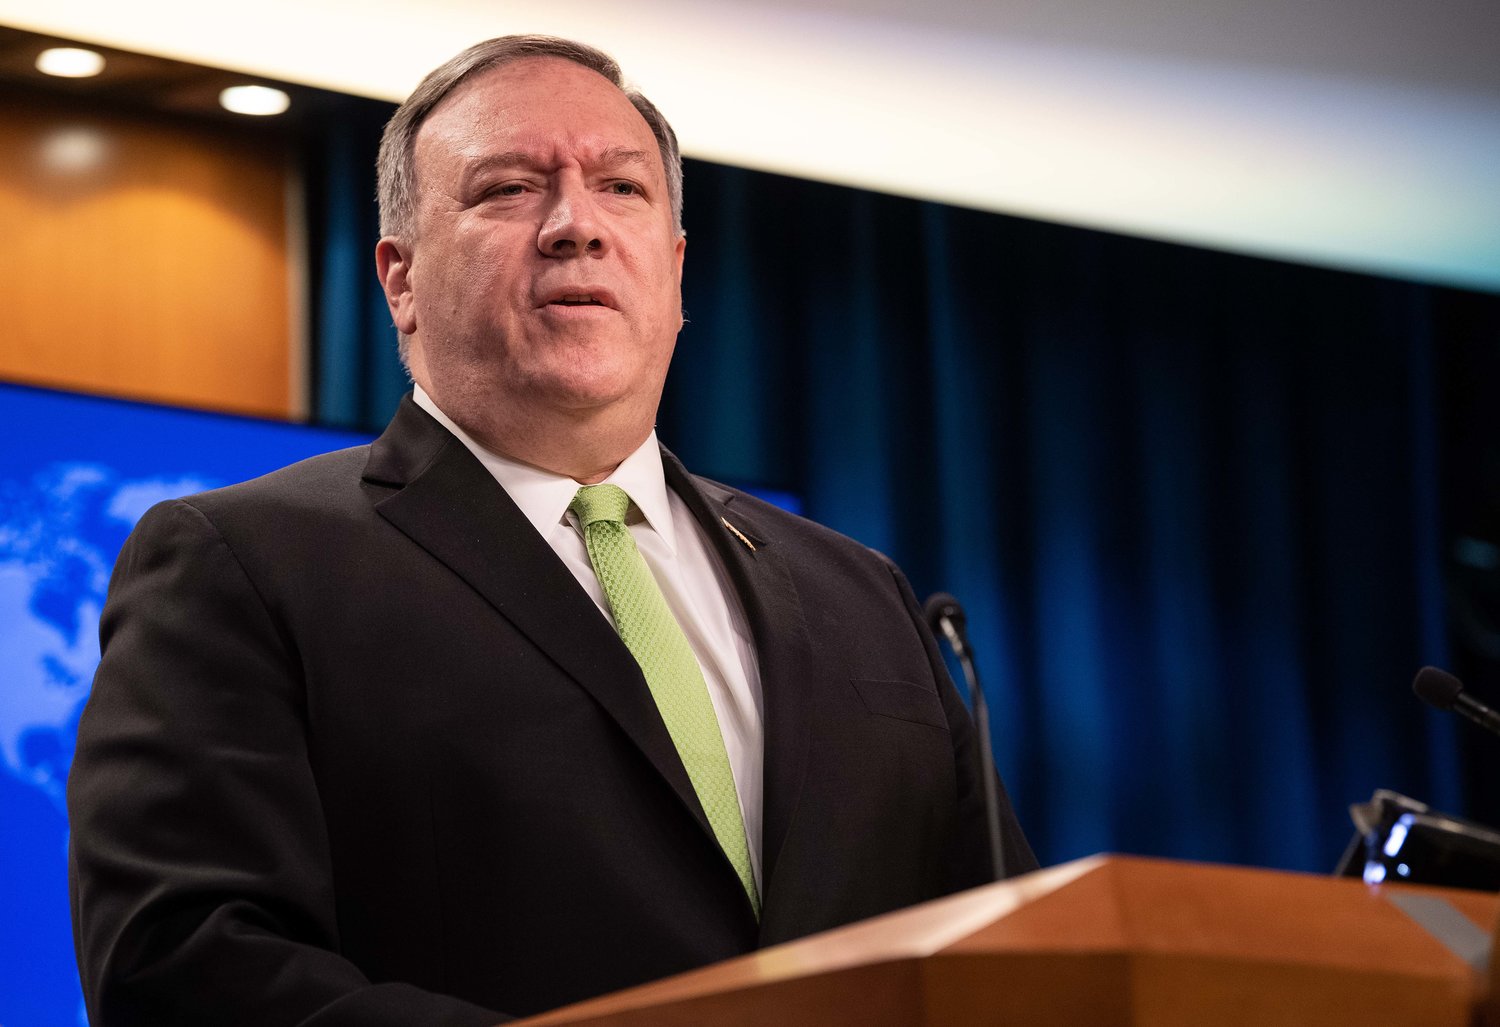 Then-Secretary of State Mike Pompeo speaks to the press at the State Department in Washington, D.C., on May 20, 2020. (Nicholas Kamm/AFP via Getty Images/TNS)